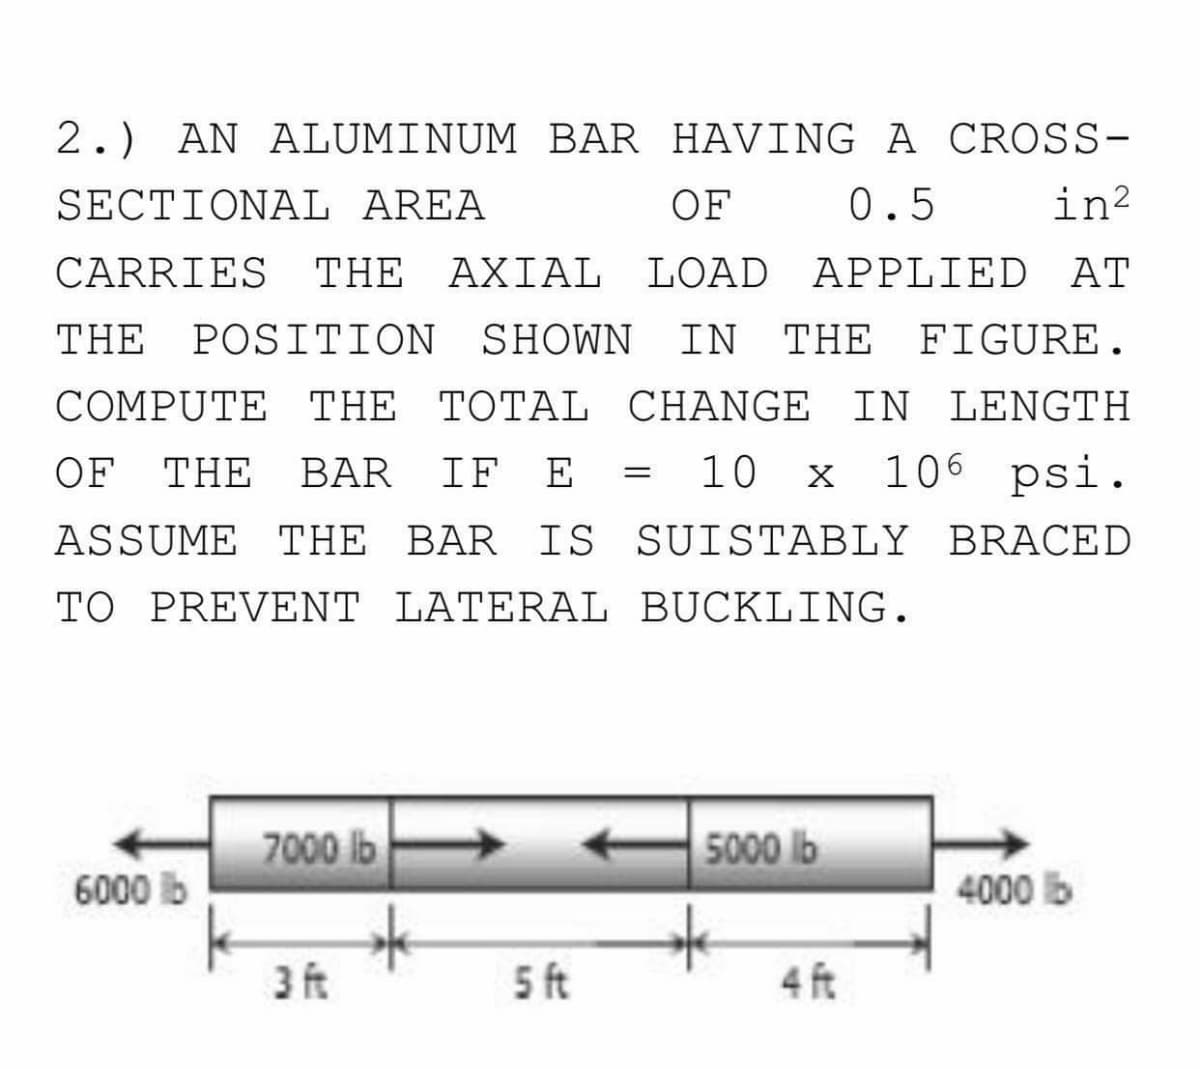 2.) AN ALUMINUM BAR HAVING A CROSS-
SECTIONAL AREA
OF
0.5
in?
CARRIES
THE AXIAL LOAD APPLIED AT
THE POSITION SHOWN
IN THE FIGURE.
COMPUTE THE TOTAL CHANGE IN LENGTH
OF THE
BAR
IF E
10 x
106 psi.
ASSUME THE BAR IS SUISTABLY BRACED
TO PREVENT LATERAL BUCKLING.
7000 lb
5000 lb
6000 b
4000 b
3 ft
5 ft
4 ft
5
